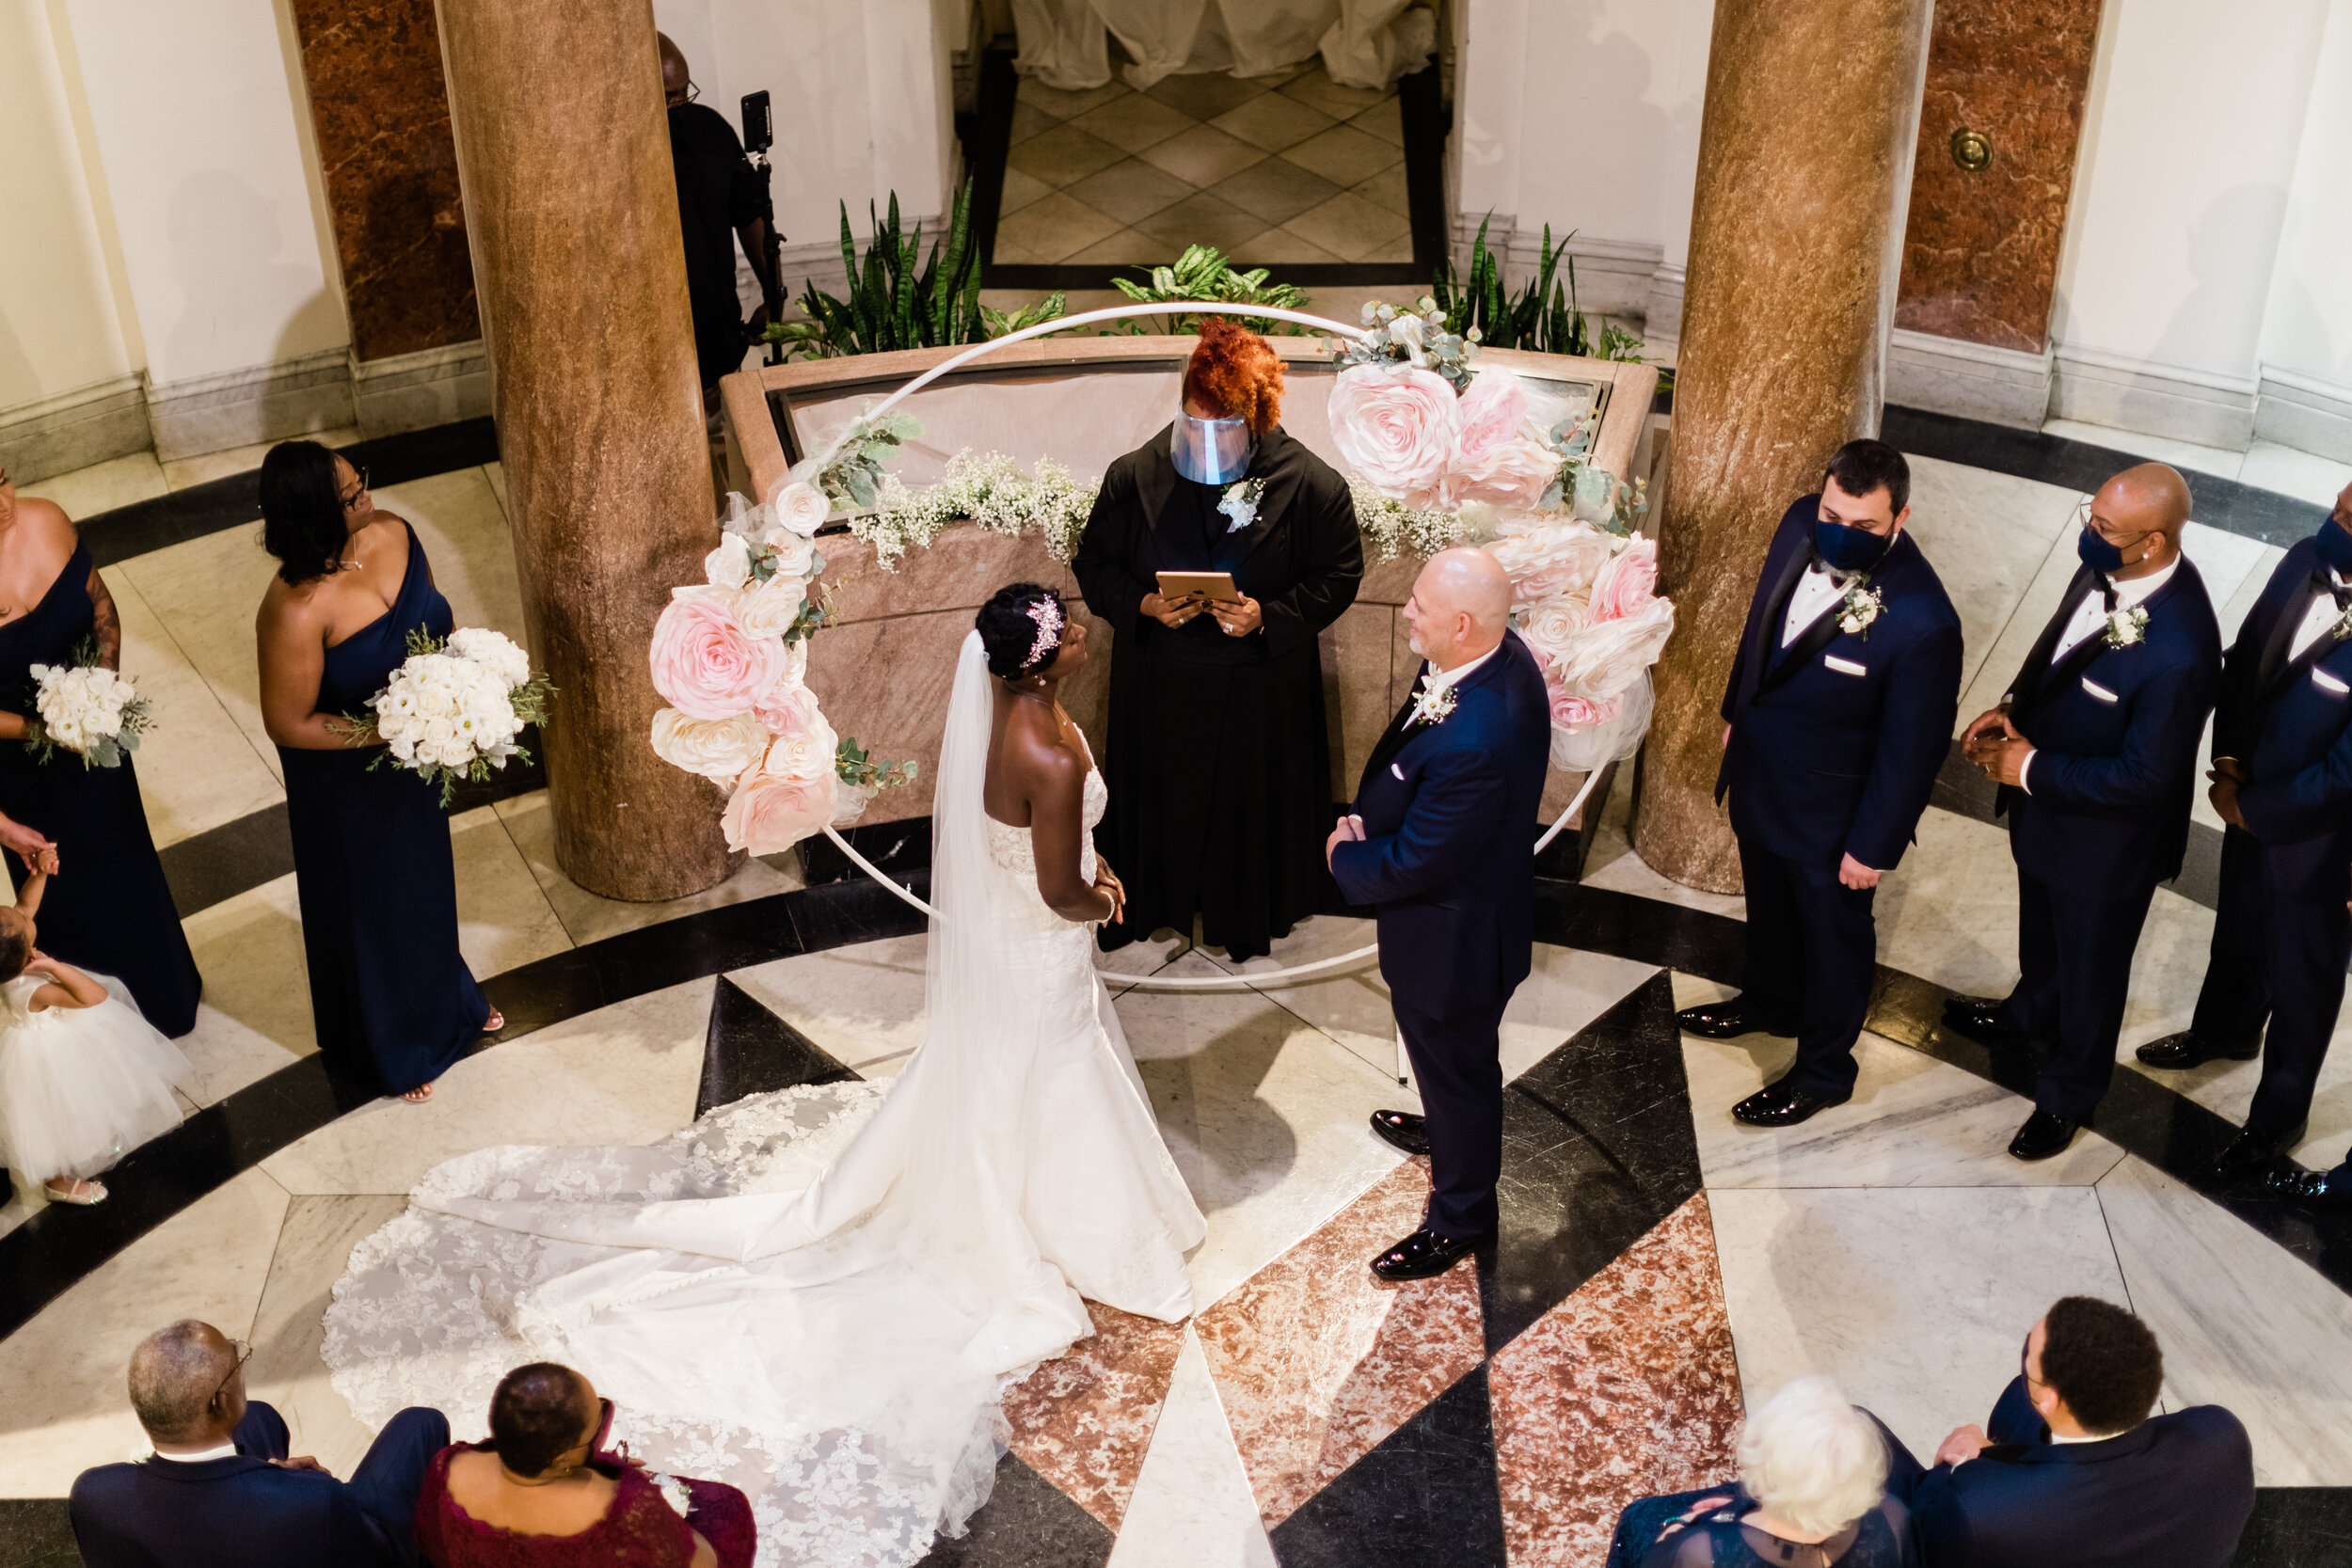 get married in baltimore city hall shot by megapixels media biracial couple wedding photographers maryland-68.jpg